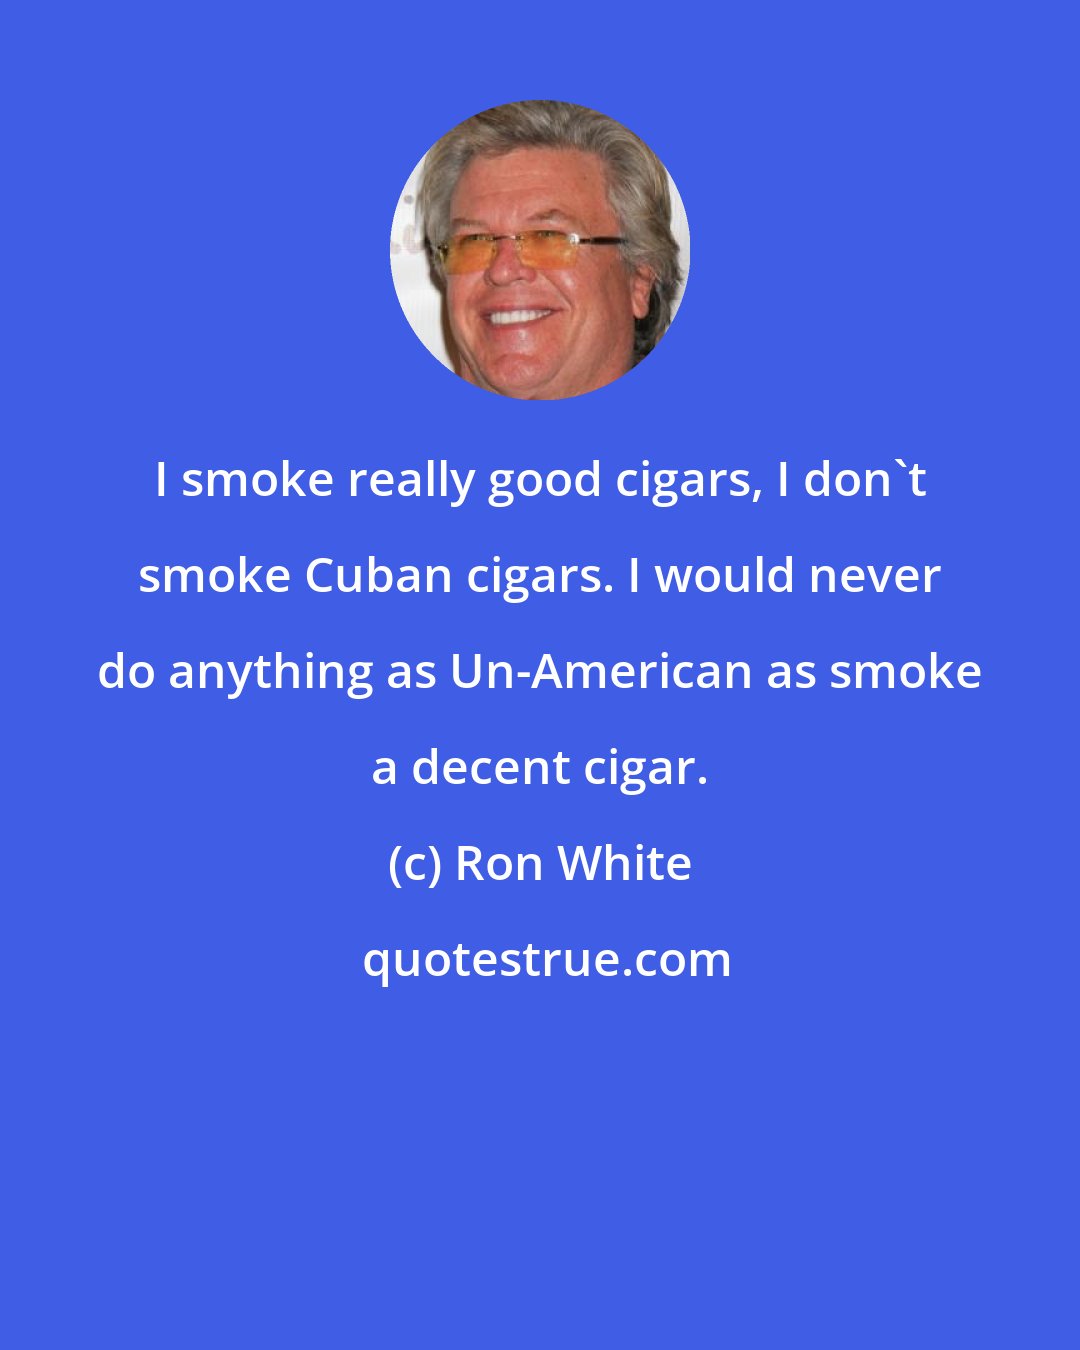 Ron White: I smoke really good cigars, I don't smoke Cuban cigars. I would never do anything as Un-American as smoke a decent cigar.